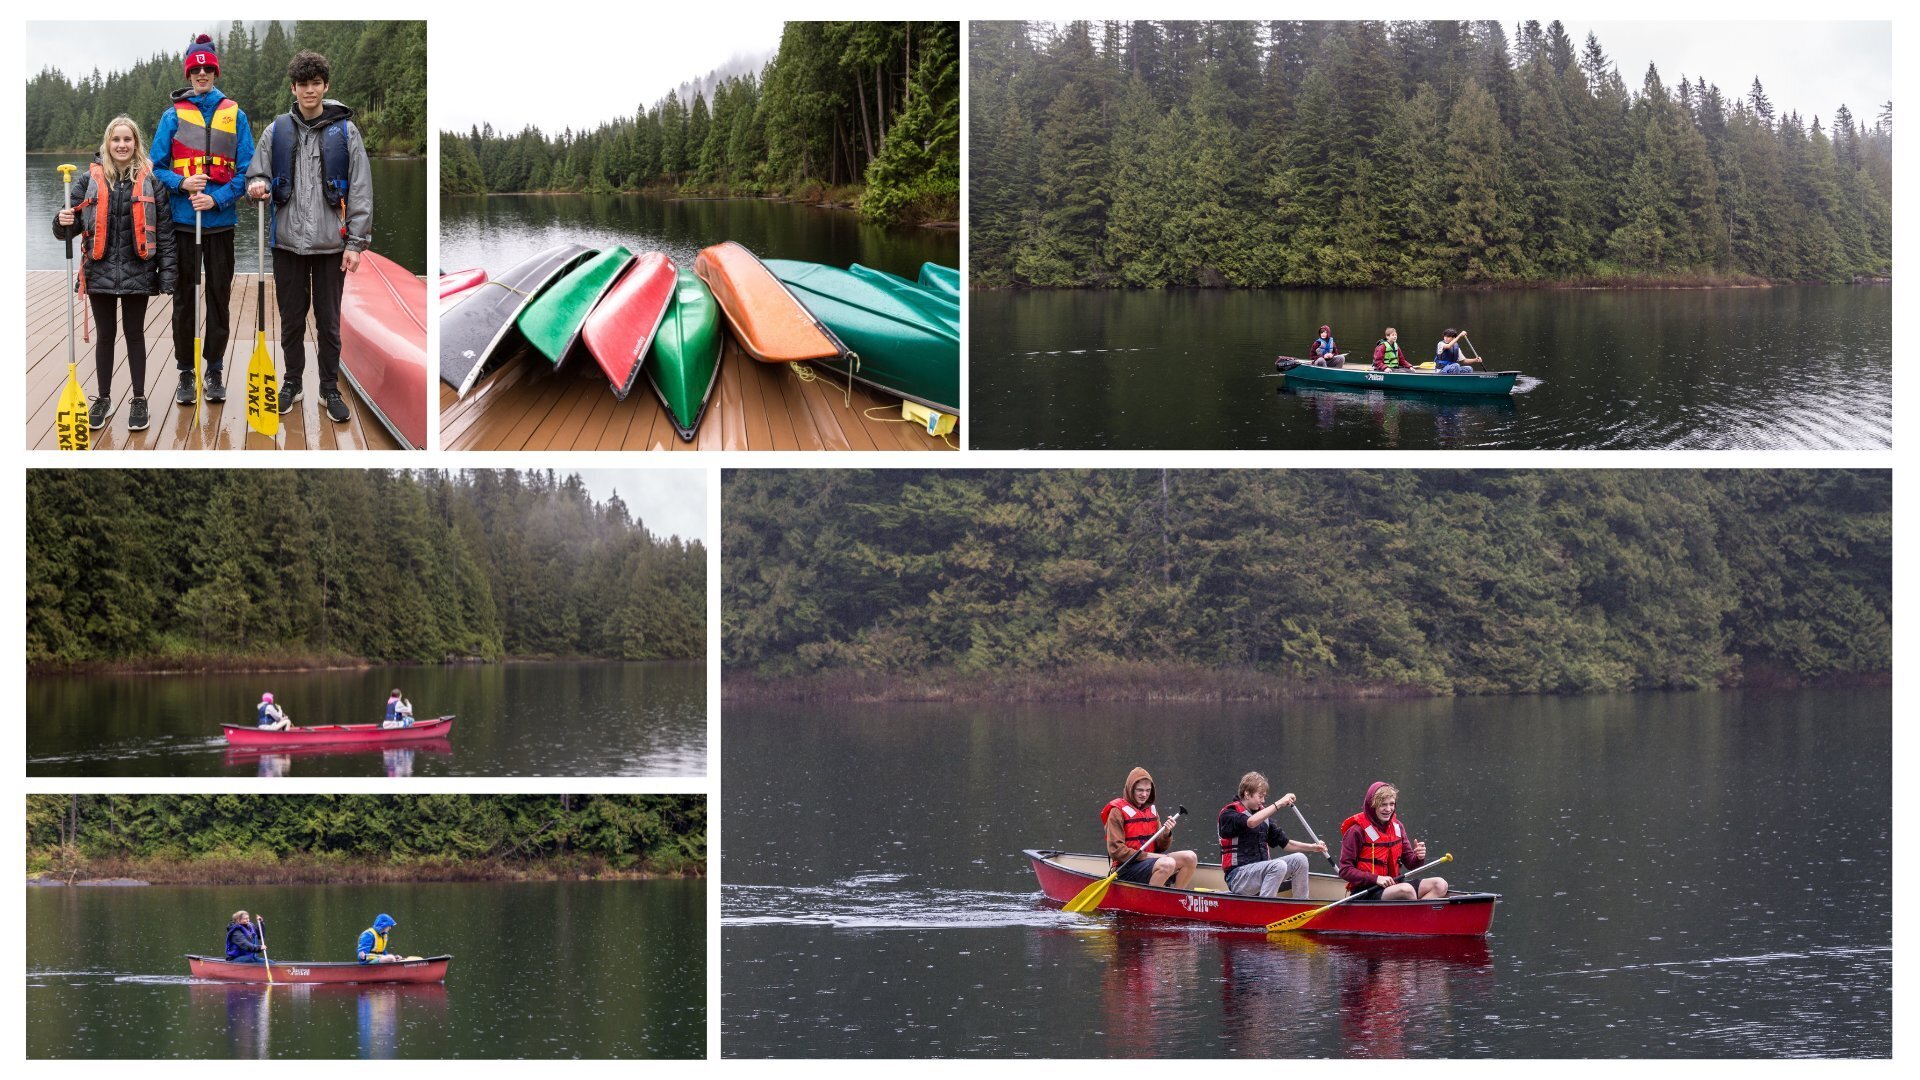 photos of people canoeing on Loon Lake